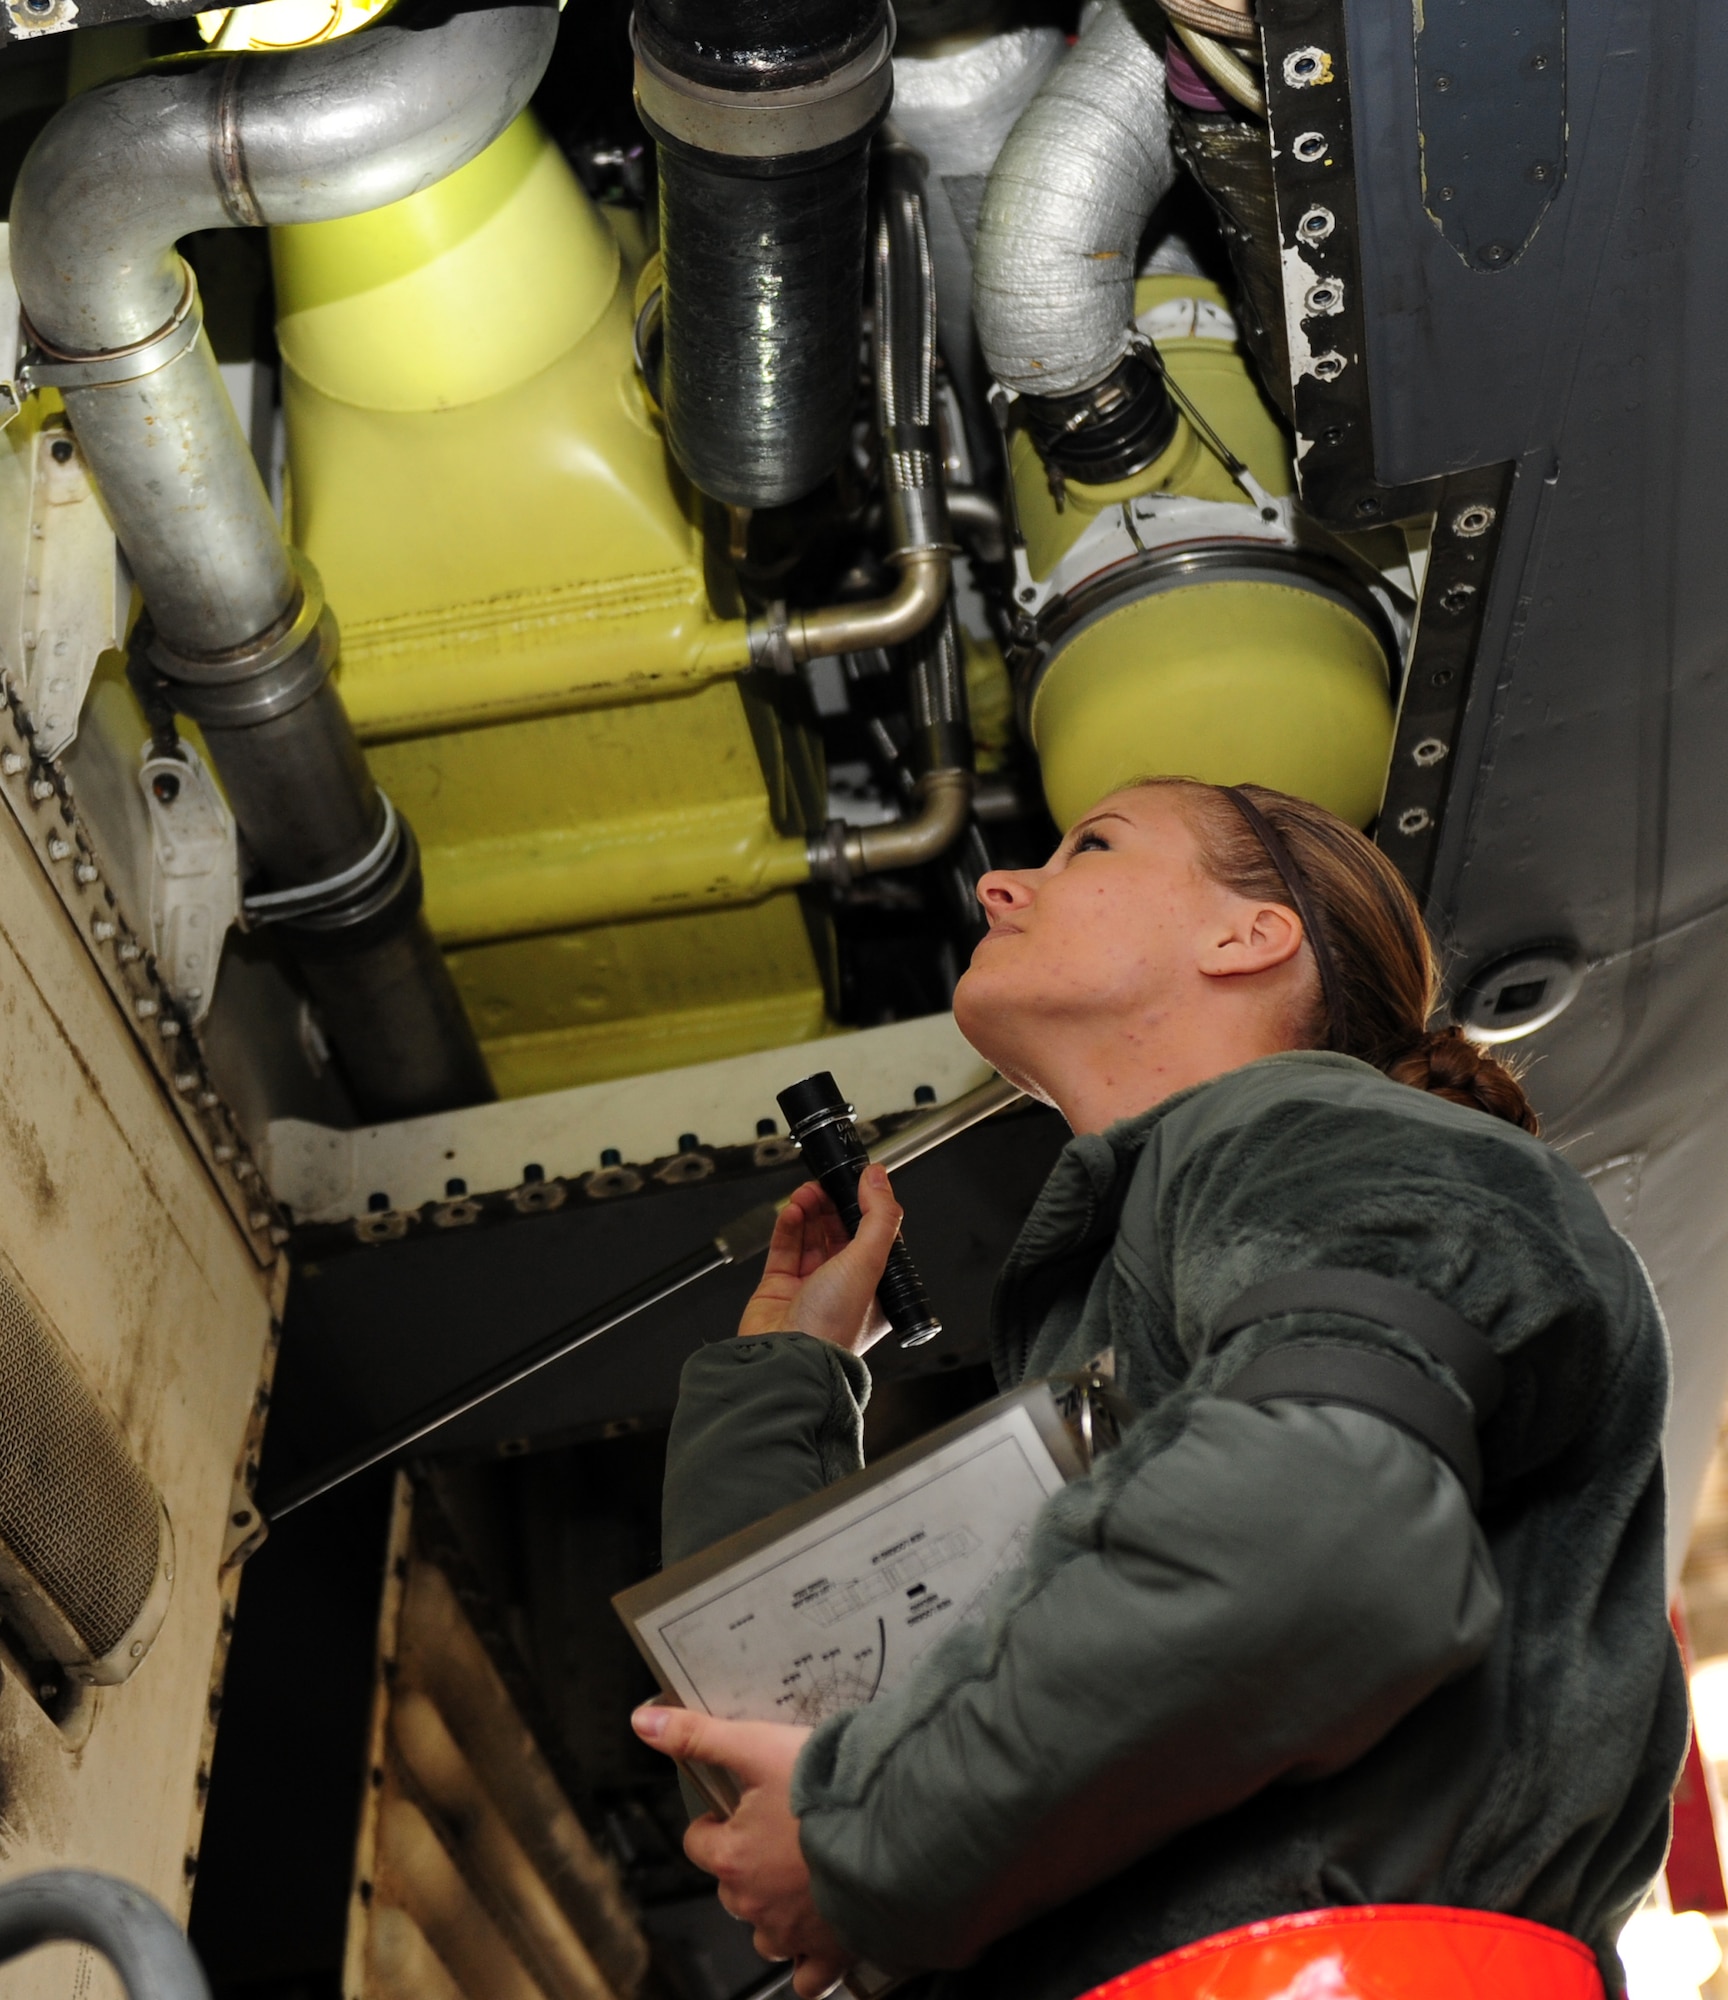 U.S. Air Force Airman 1st Class Tia Meredith, 7th Equipment Maintenance Squadron, follows her technical order while inspecting turbo compressors on a B-1B Lancer Nov. 8, 2013, at Dyess Air Force Base, Texas. Meredith inspects for anything that could possibly cause damage to an aircraft. (U.S. Air Force photo by Senior Airman Kia Atkins/Released)